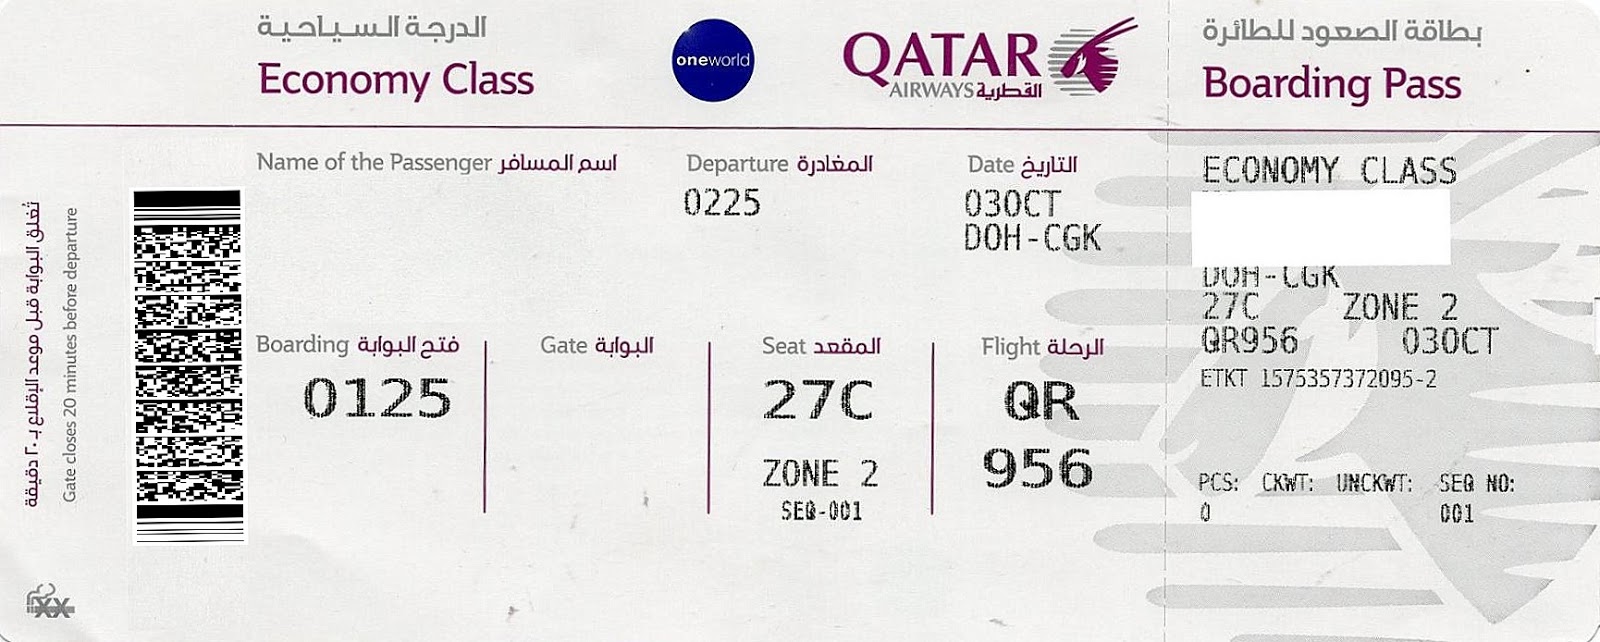 travel and entry requirements page qatar airways